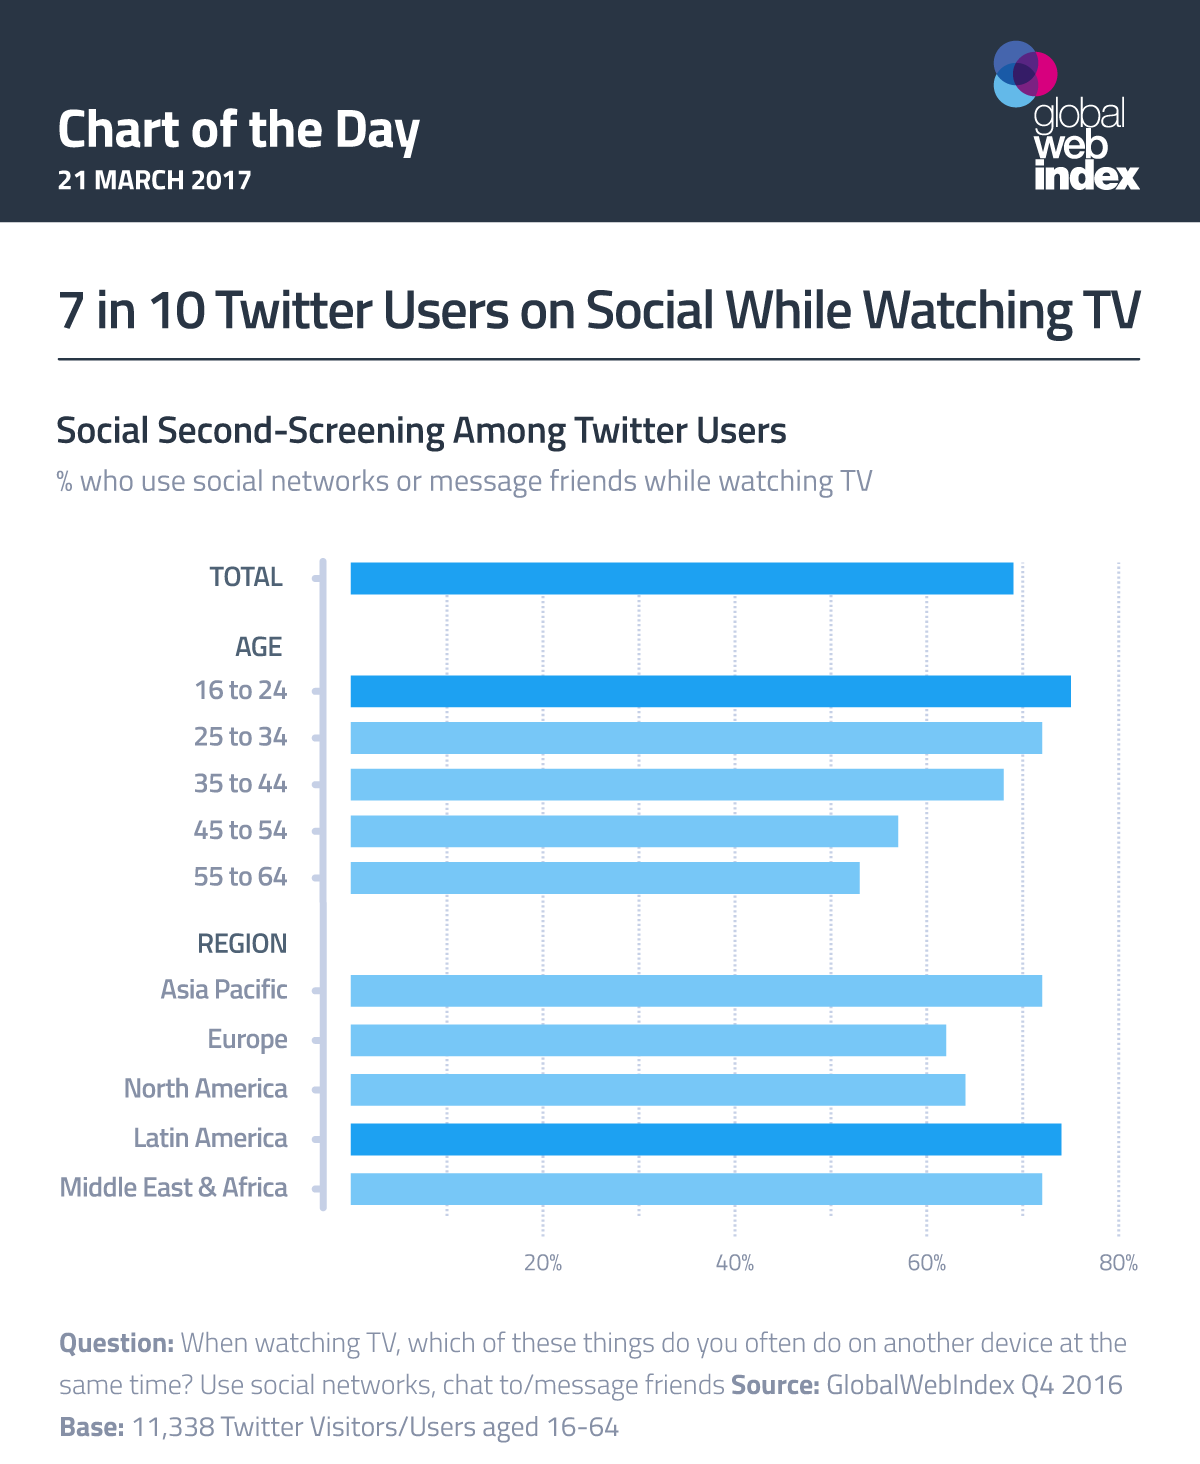 7 in 10 Twitter Users on Social While Watching TV - chart of the day